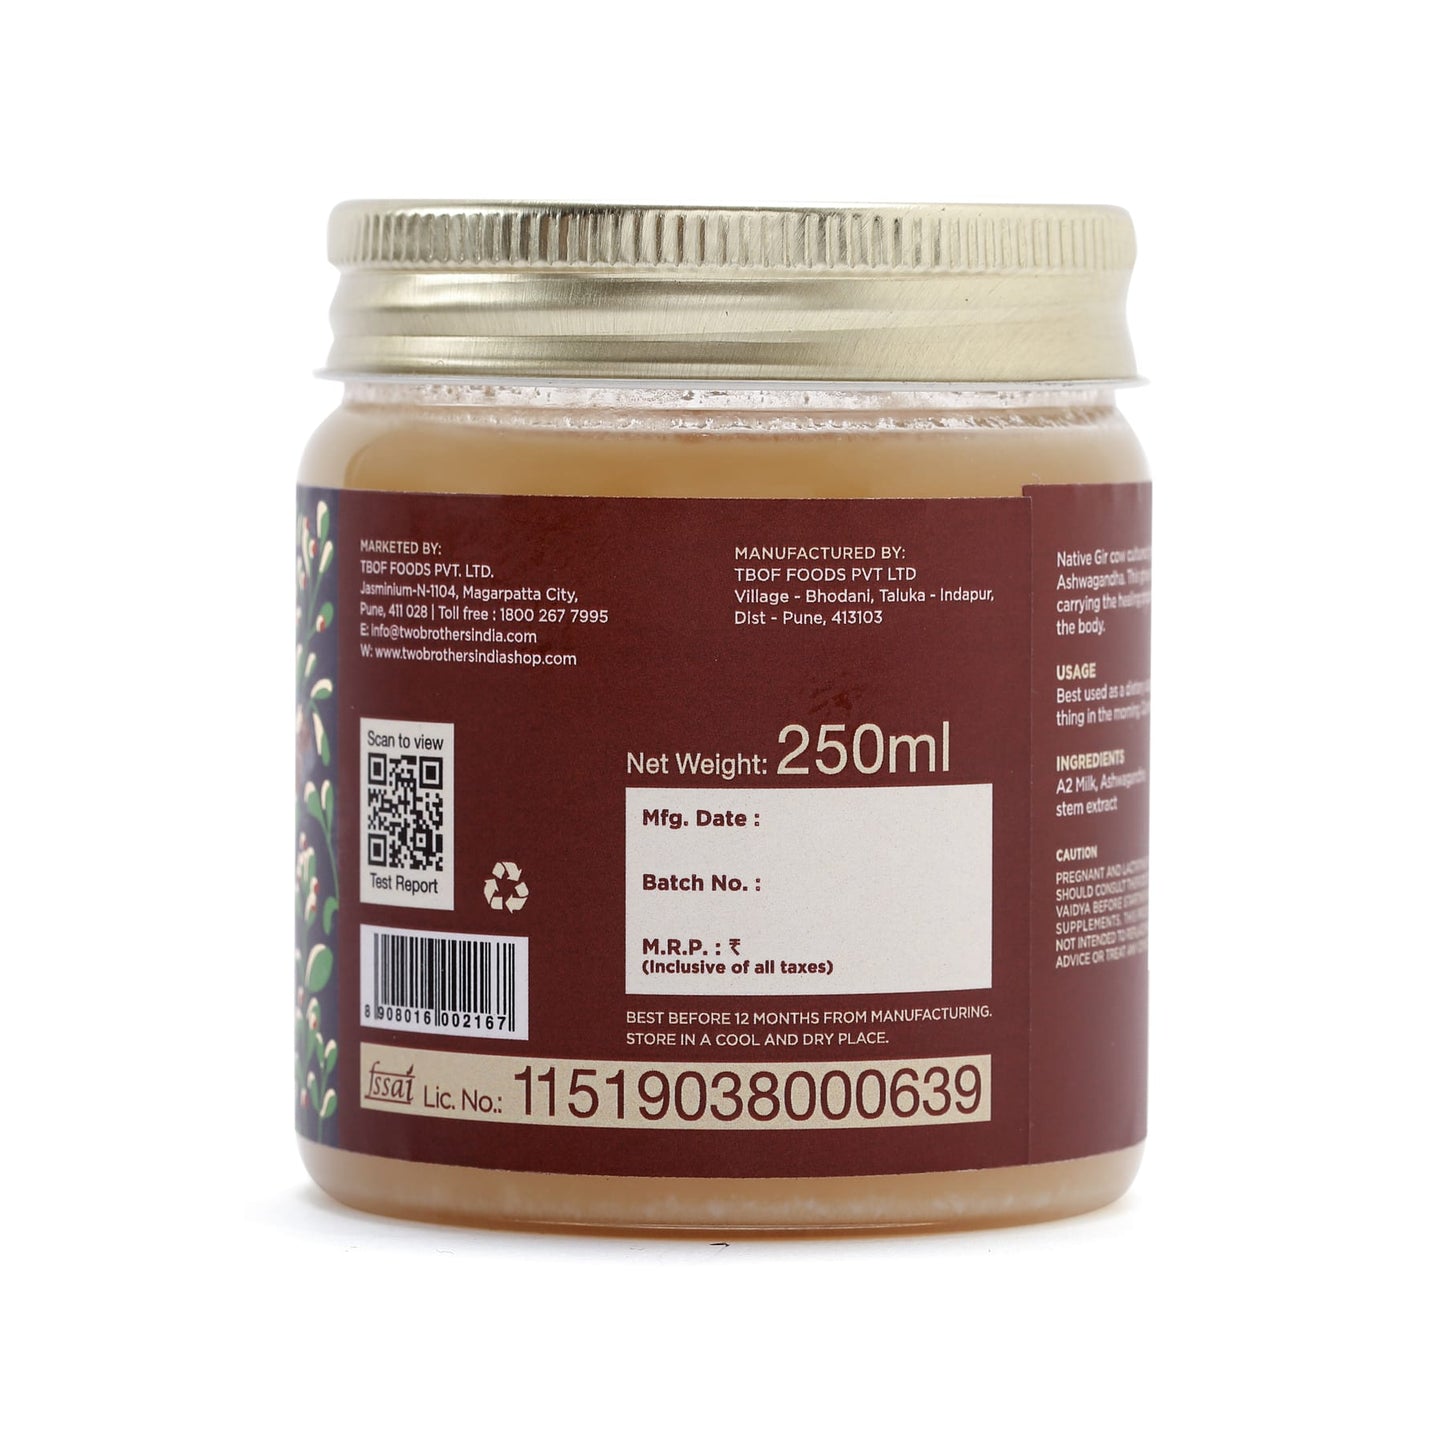 Buy Two Brothers Amorearth A2 Cultured Ashwagandha Ghee Online